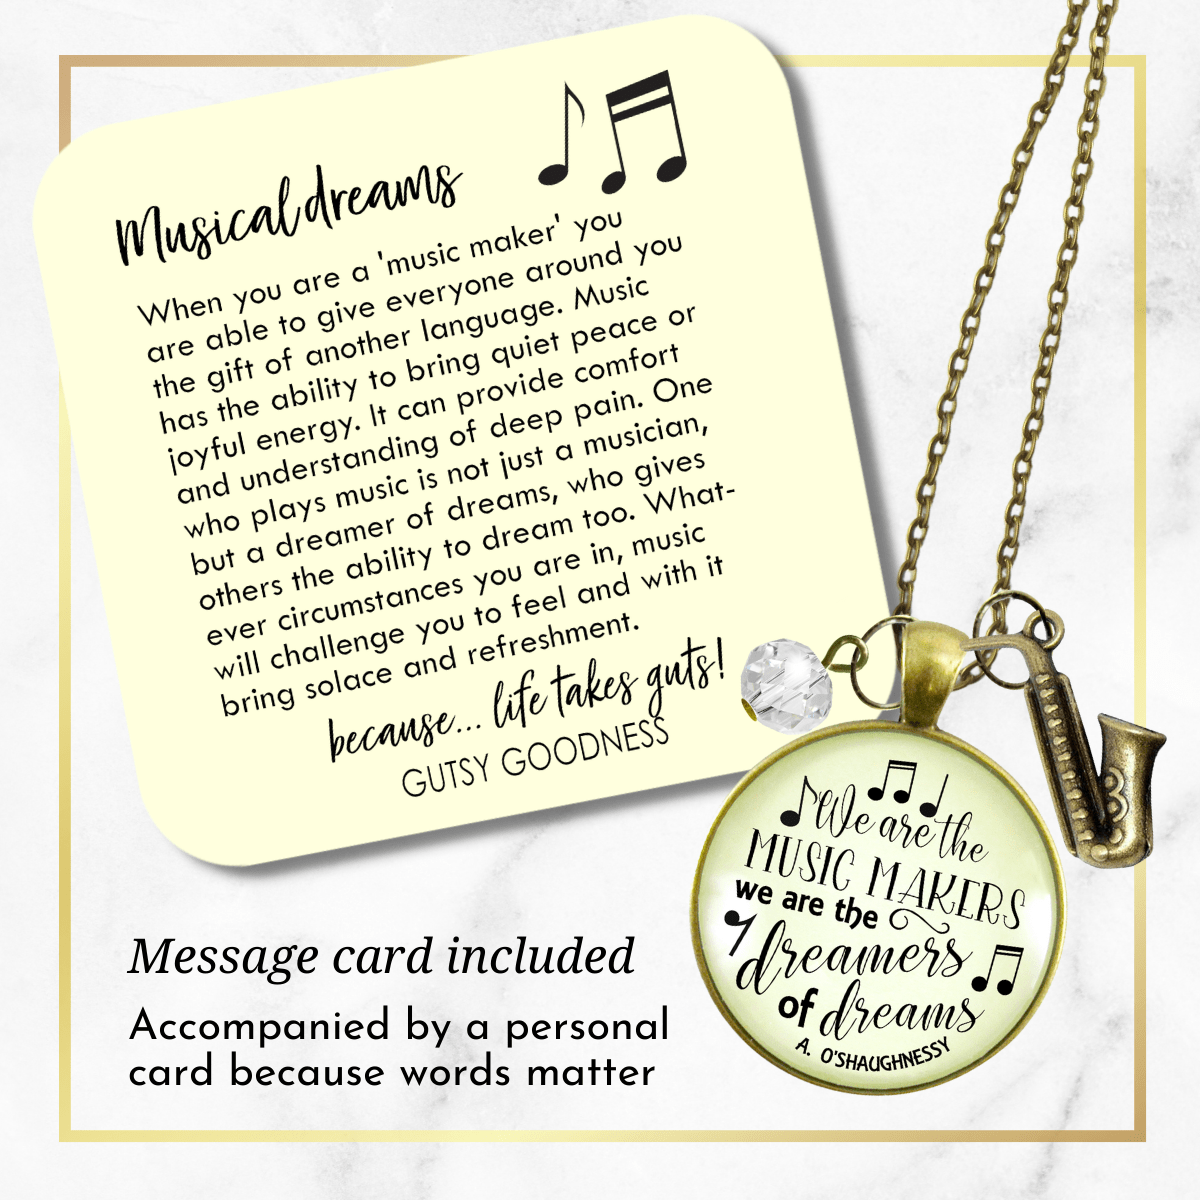 Gutsy Goodness Saxophone Necklace We are Music Makers Musician Sax Player Jewelry - Gutsy Goodness Handmade Jewelry;Saxophone Necklace We Are Music Makers Musician Sax Player Jewelry - Gutsy Goodness Handmade Jewelry Gifts